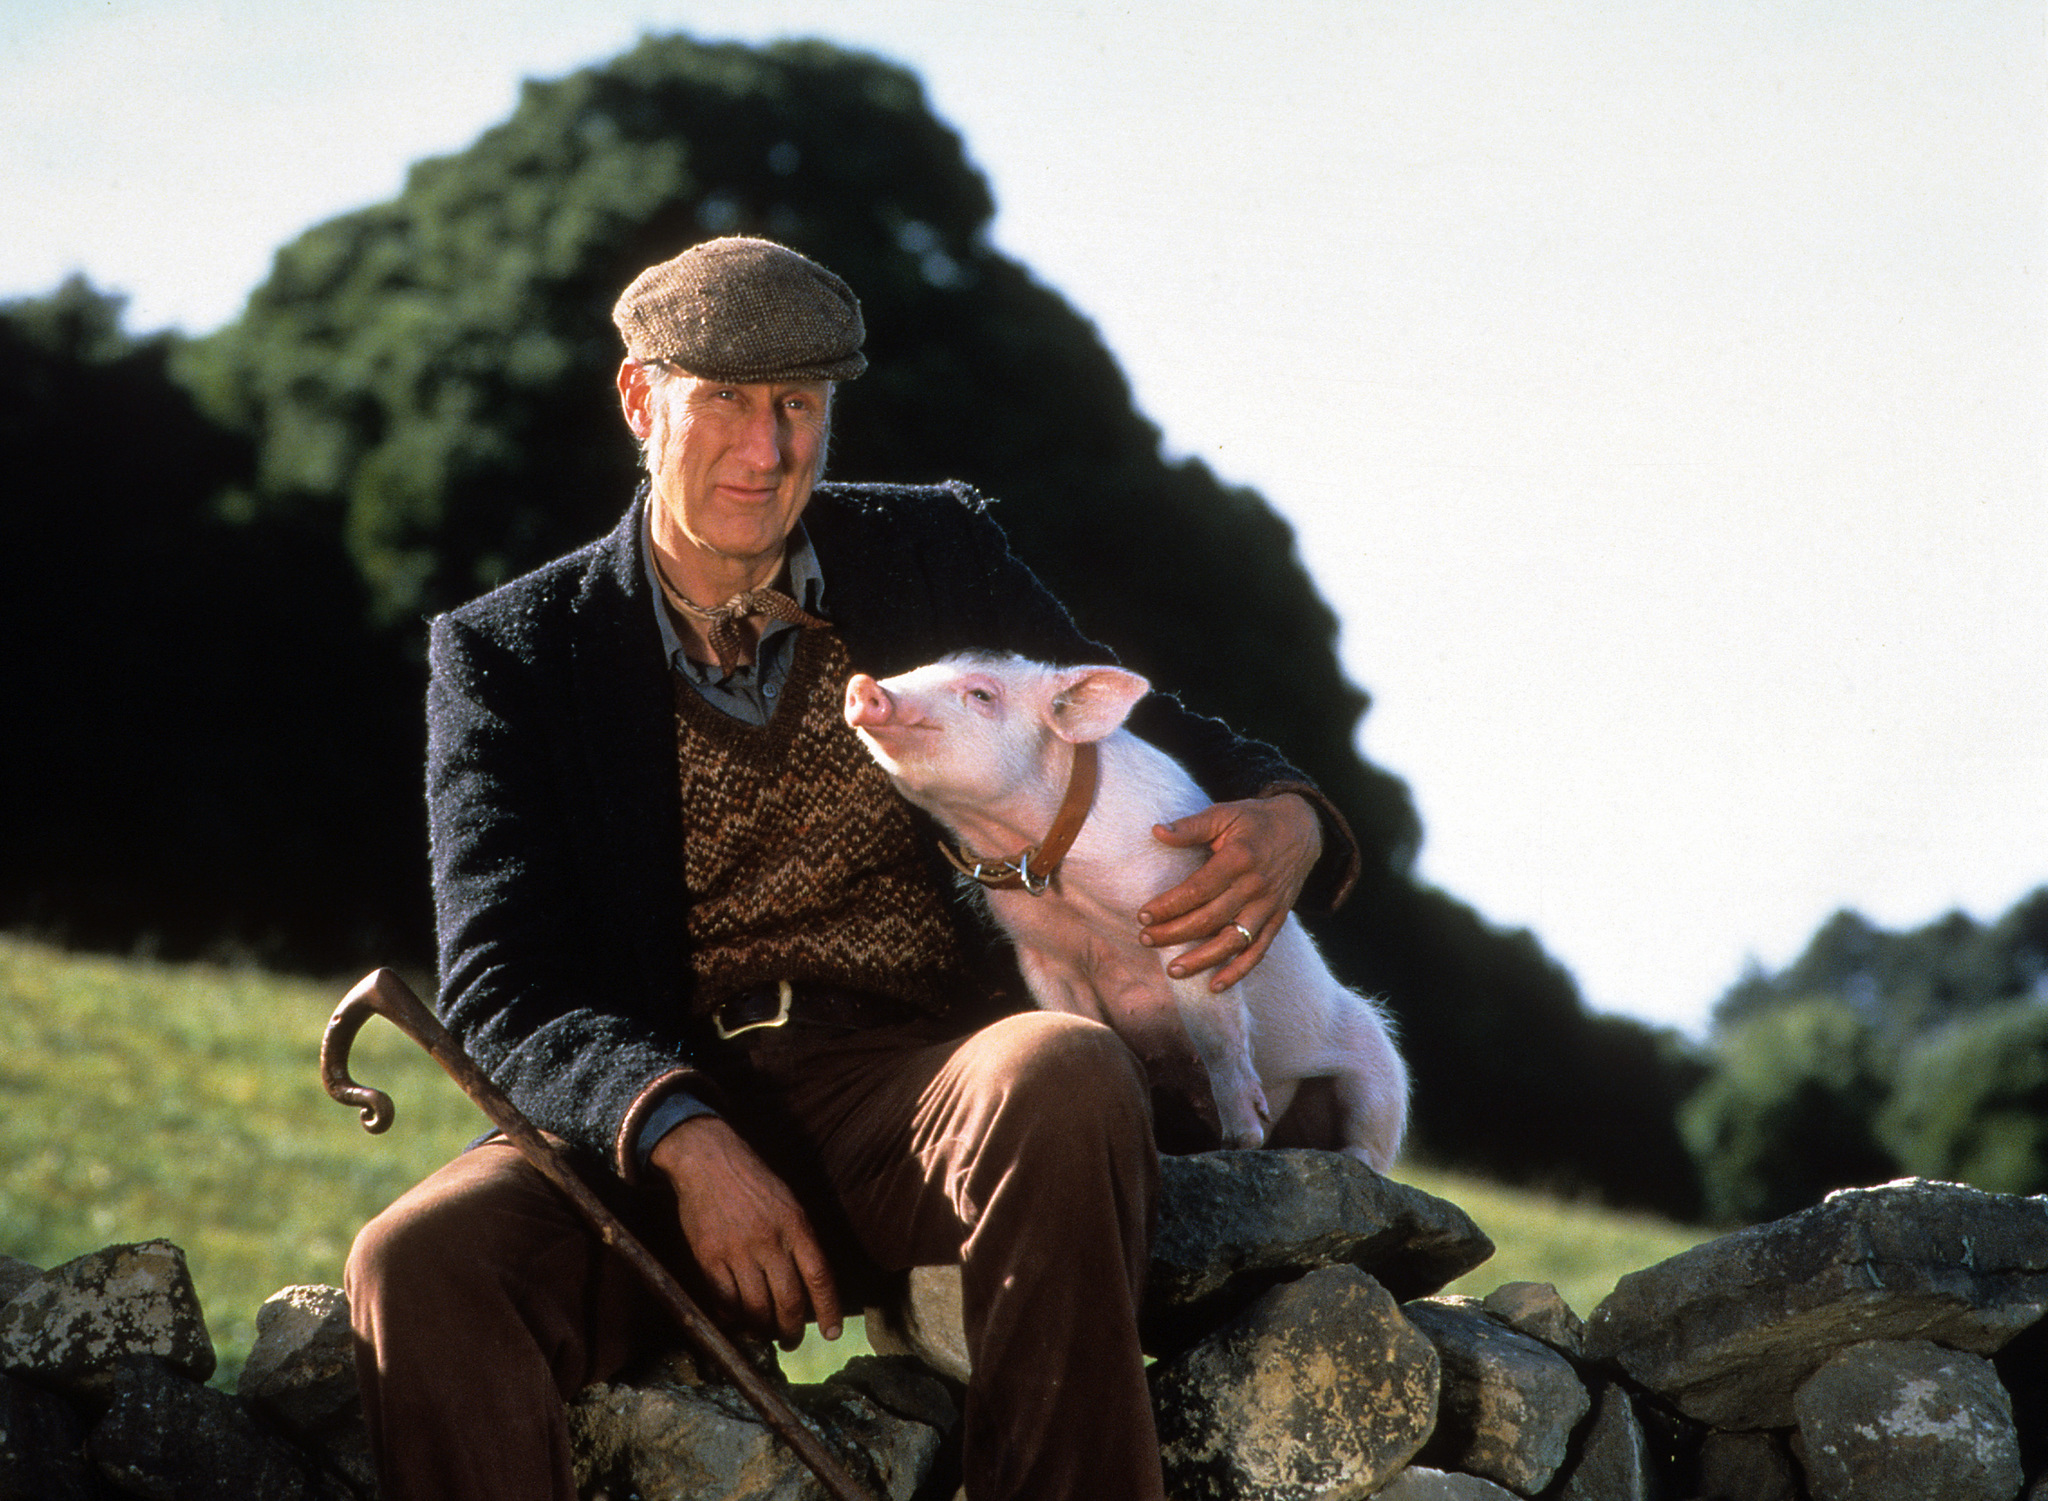 James Cromwell as Arthur Hoggett in the 1995 film “Babe” directed by Chris Noonan.